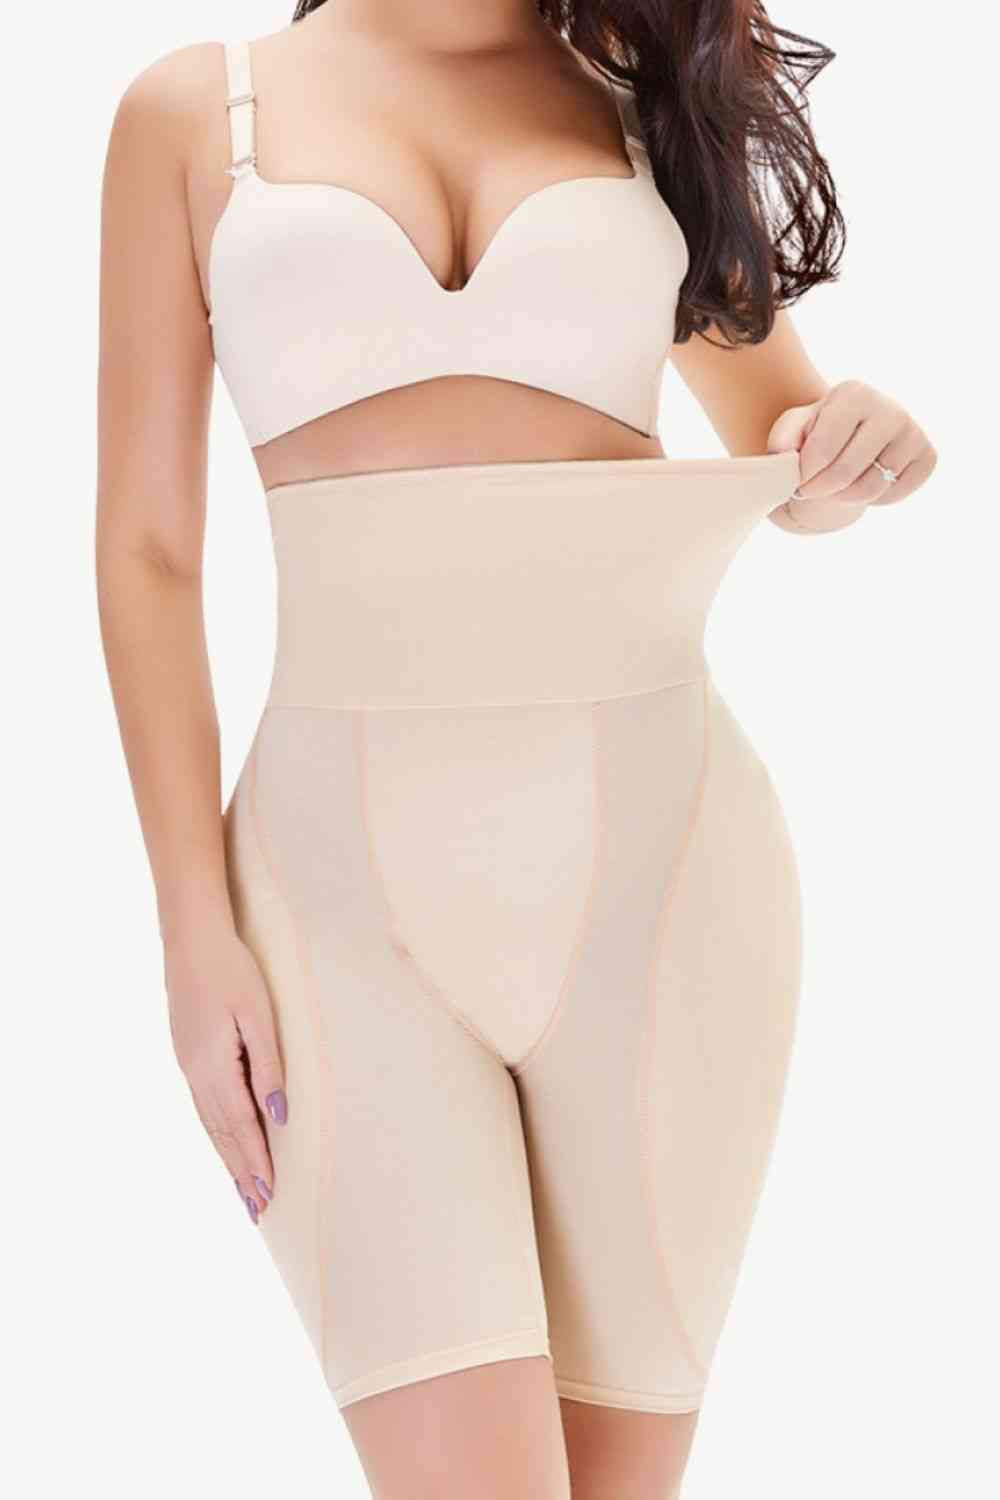 Full Size High Waisted Pull-On Shaping Shorts - Body shaper - Wild Willows Boutique - Massapequa, NY, affordable and fashionable clothing for women of all ages. Bottoms, tops, dresses, intimates, outerwear, sweater, shoes, accessories, jewelry, active wear, and more // Wild Willow Boutique.